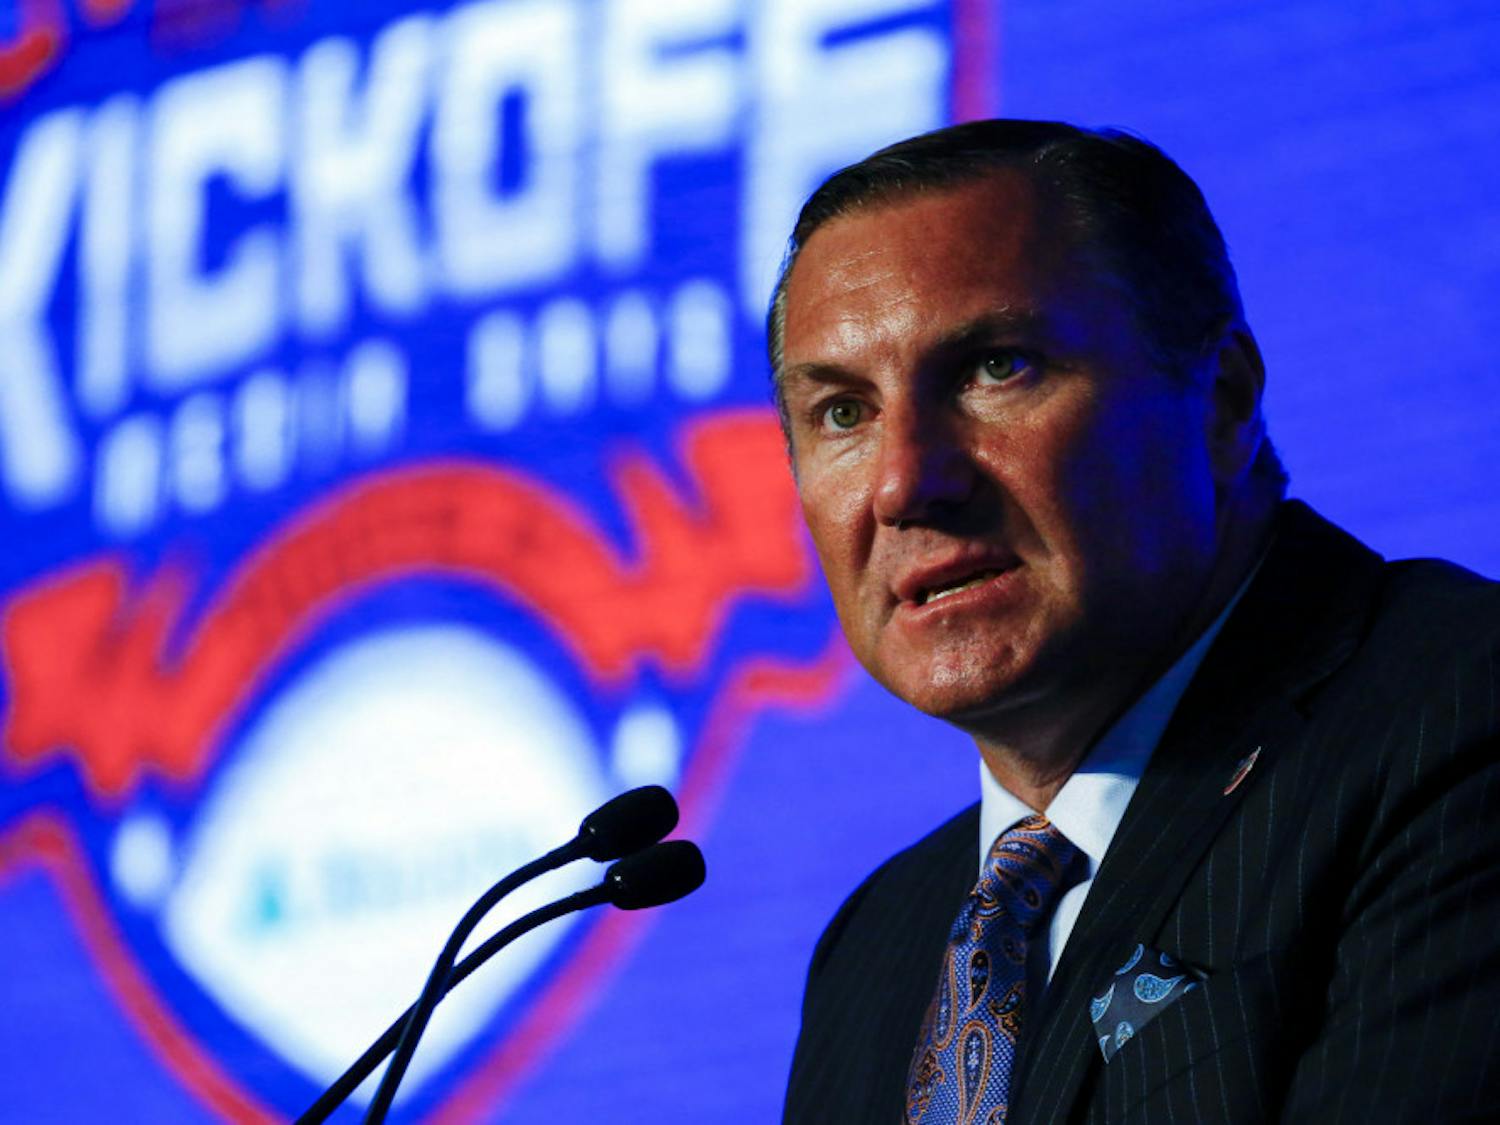 Head Coach Dan Mullen, of Florida, speaks during the NCAA college football Southeastern Conference Media Days, Monday, July 15, 2019, in Hoover, Ala.&nbsp;